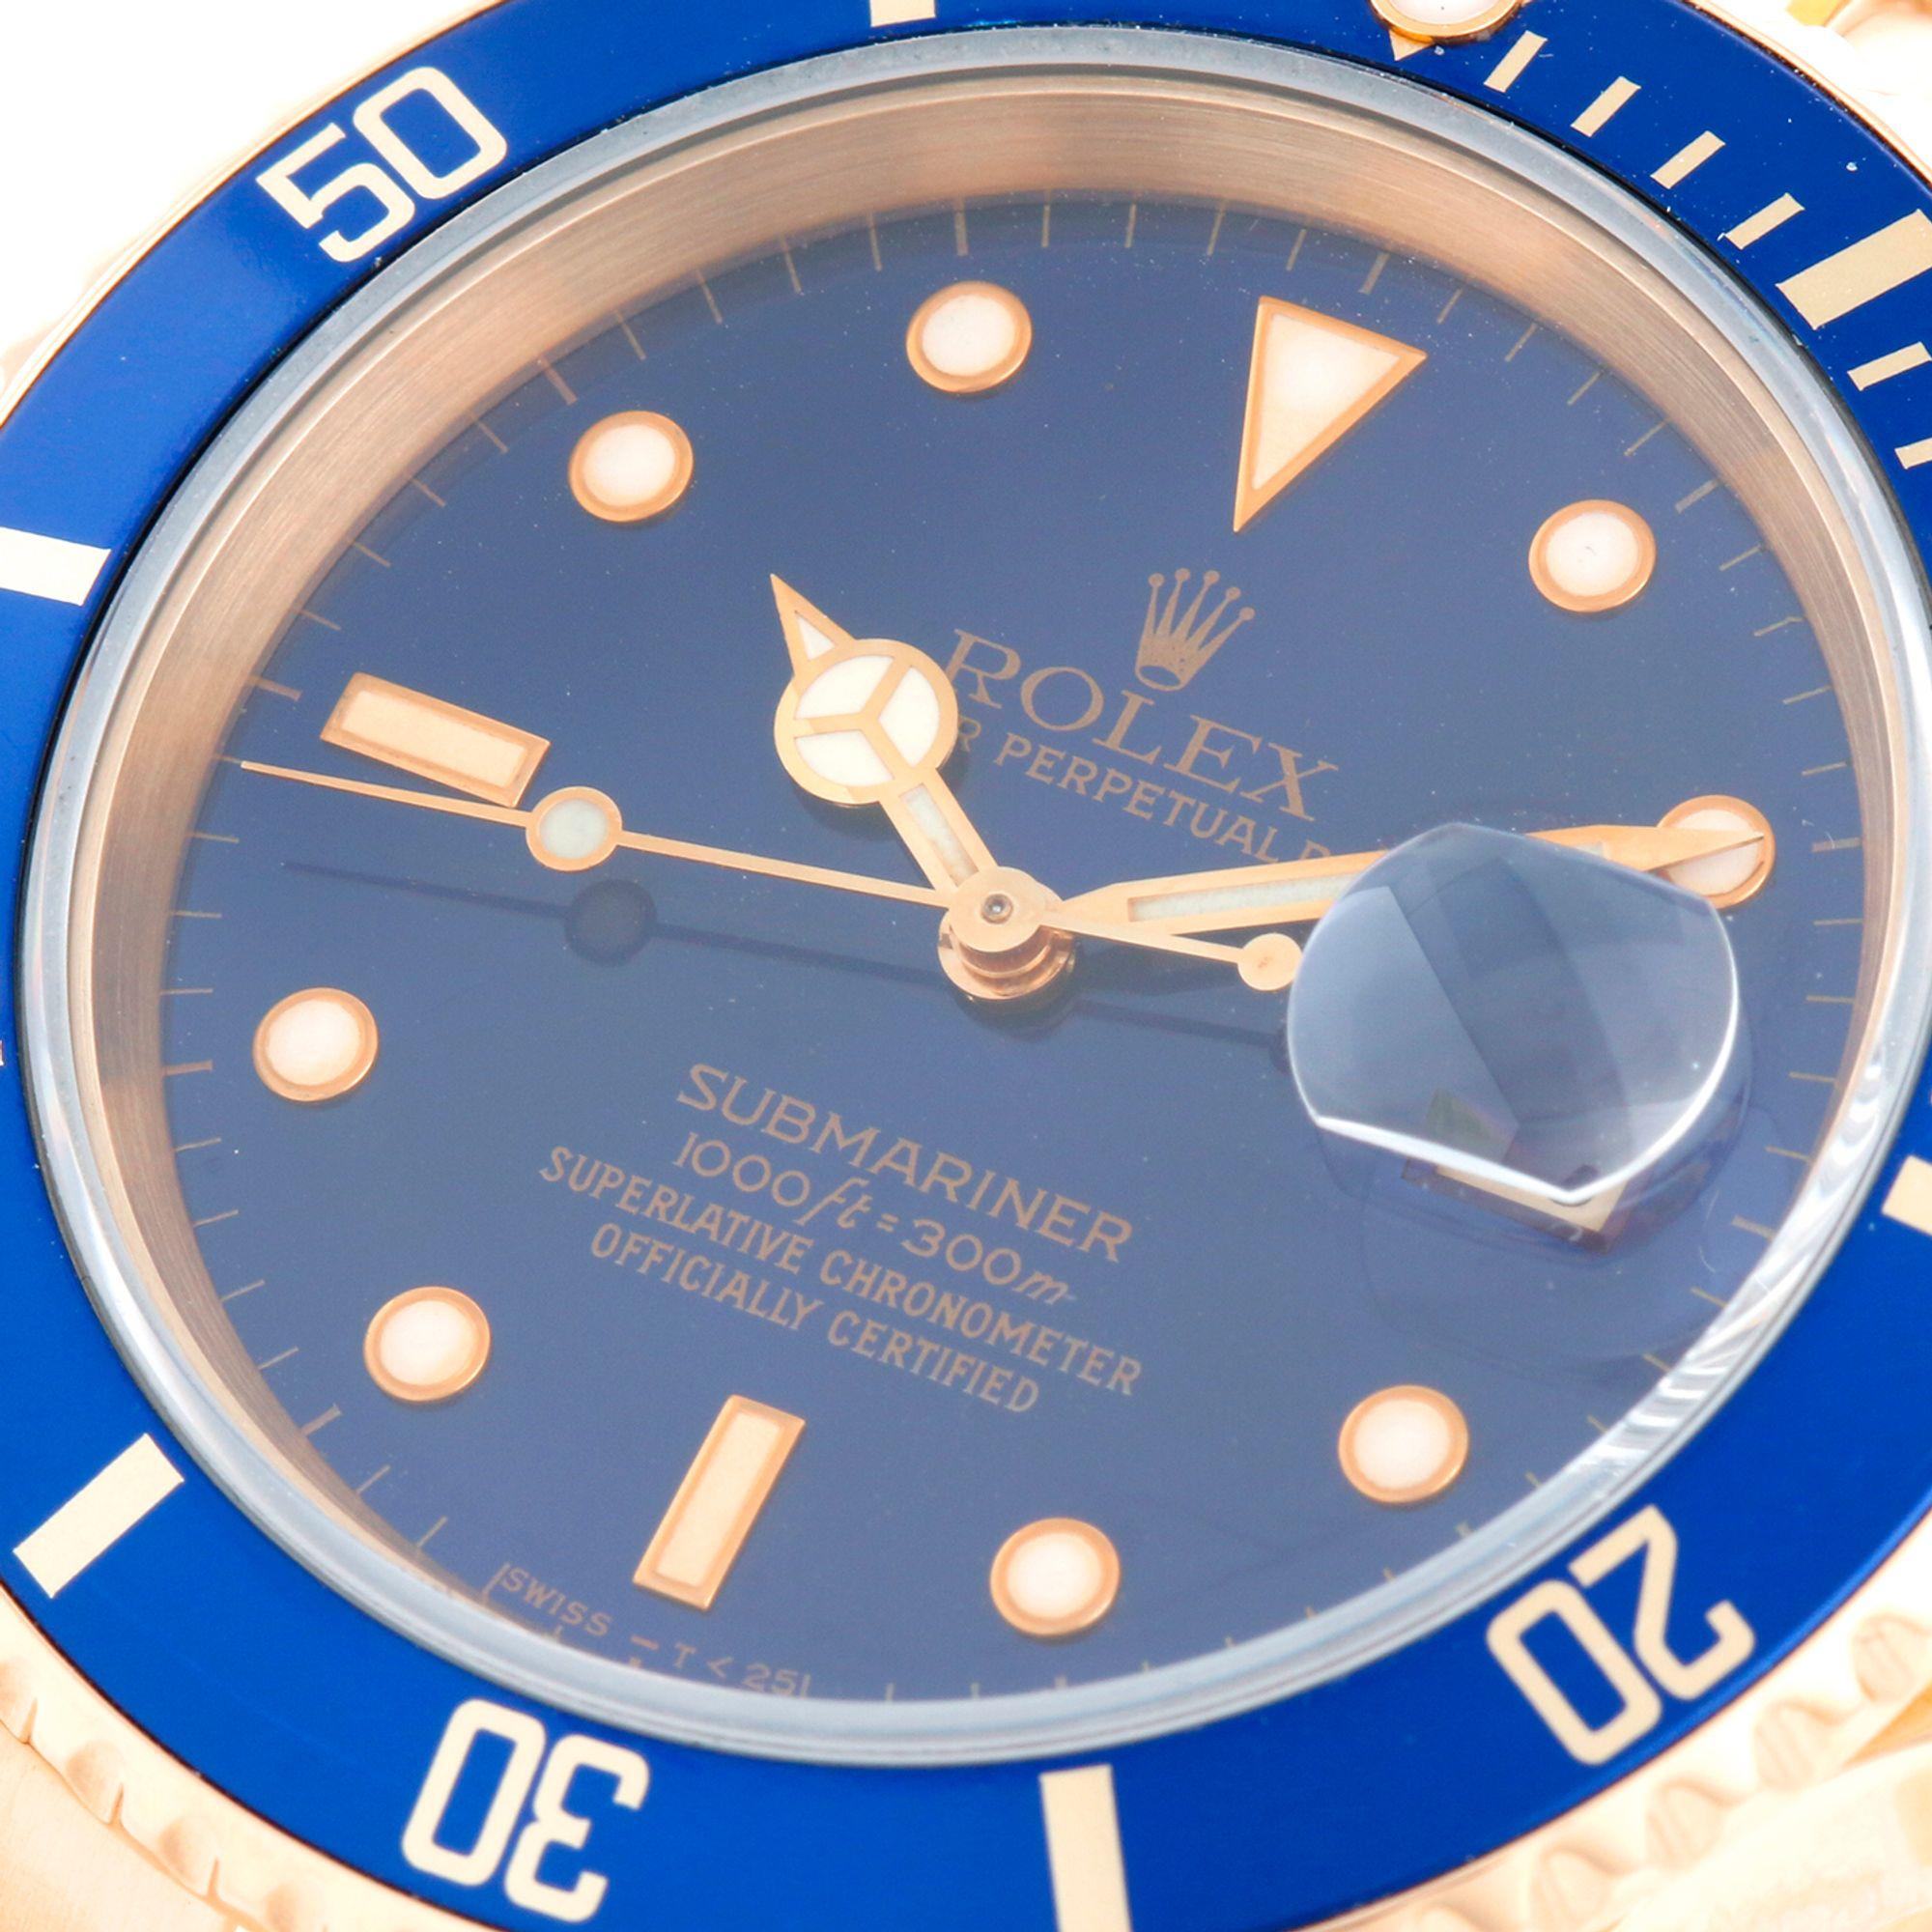 Rolex Submariner Men's 18k Gold Diver's Watch 16618 - Automatic winding, Quickset, sapphire crystal. 18k yellow gold case with rotating bezel with blue insert (40mm diameter). Blue dial. 18k yellow gold Oyster bracelet with flip-lock clasp.